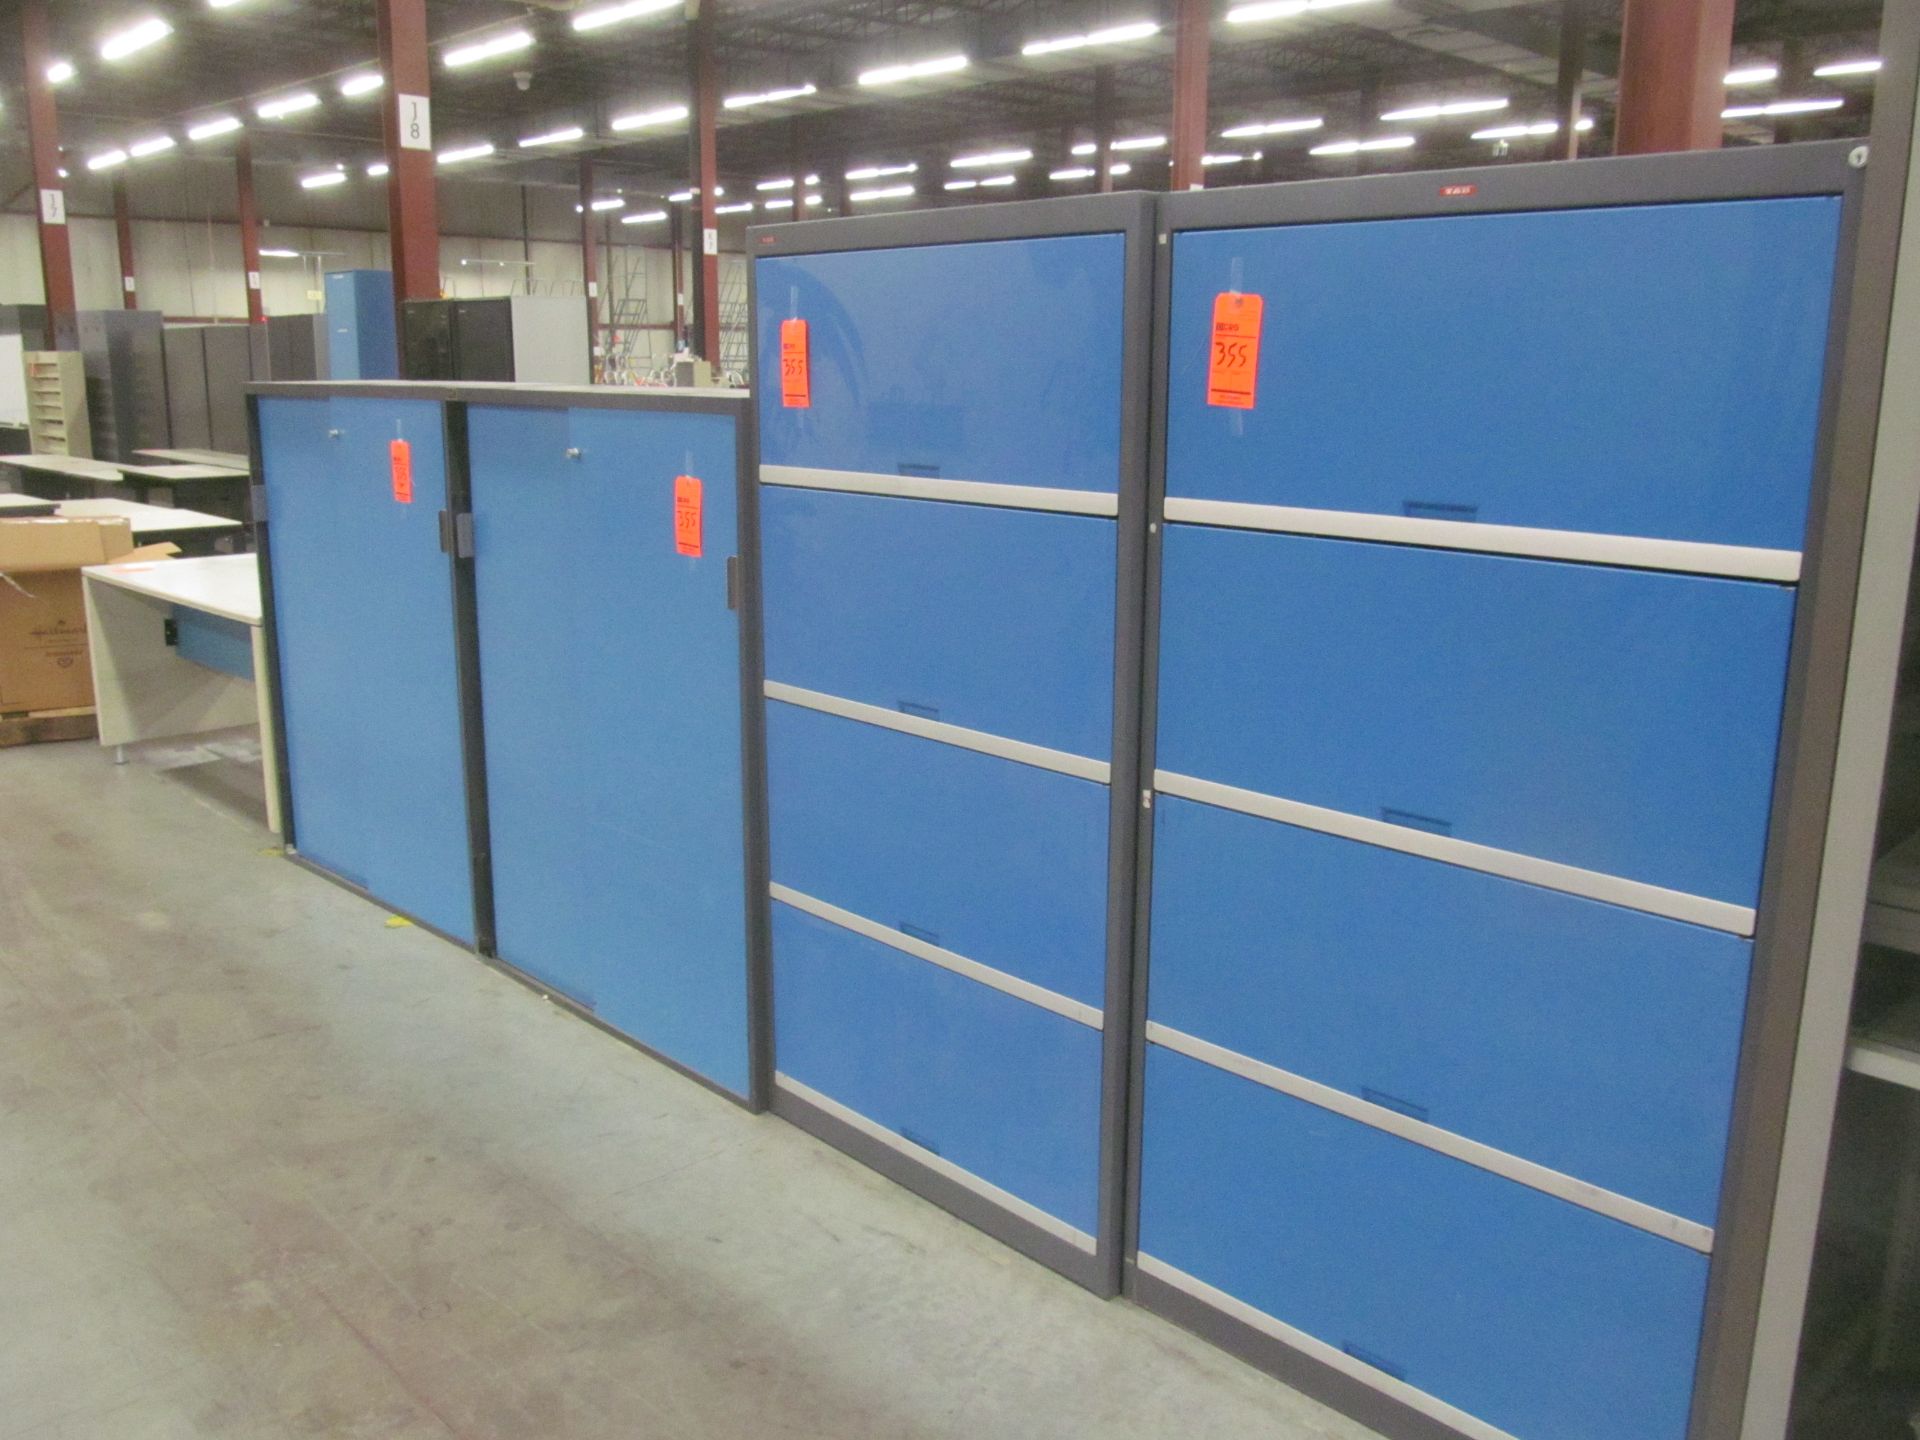 Lot of (4) metal cabinets, (2) 4 drawer lateral file cabinets, and (2) double sliding door storage - Image 2 of 2